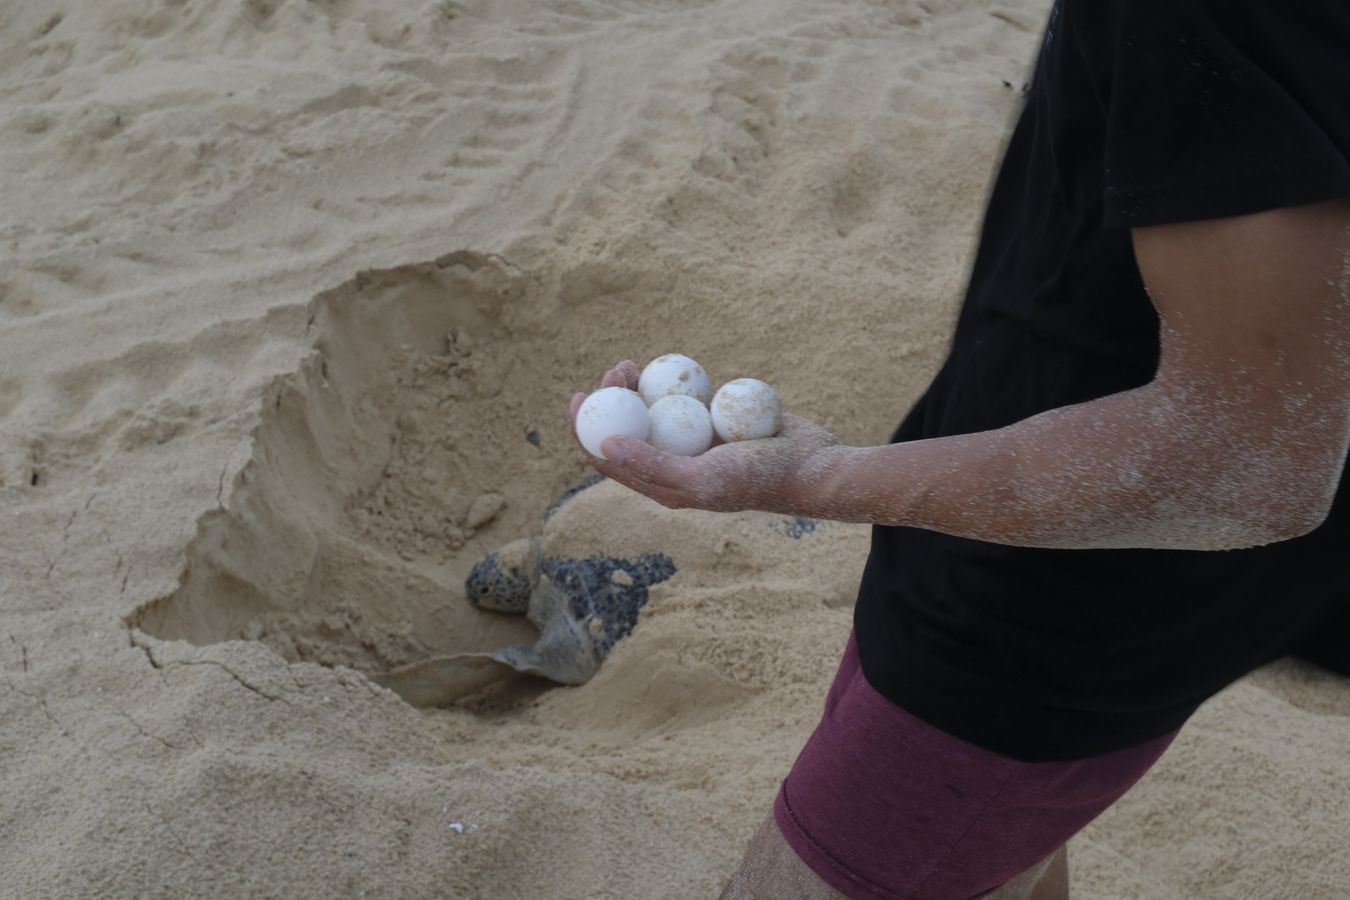 A ranger collects eggs to transfer them to the hatchery while a green turtle finishes covering the nest where it has just deposited its eggs with sand.